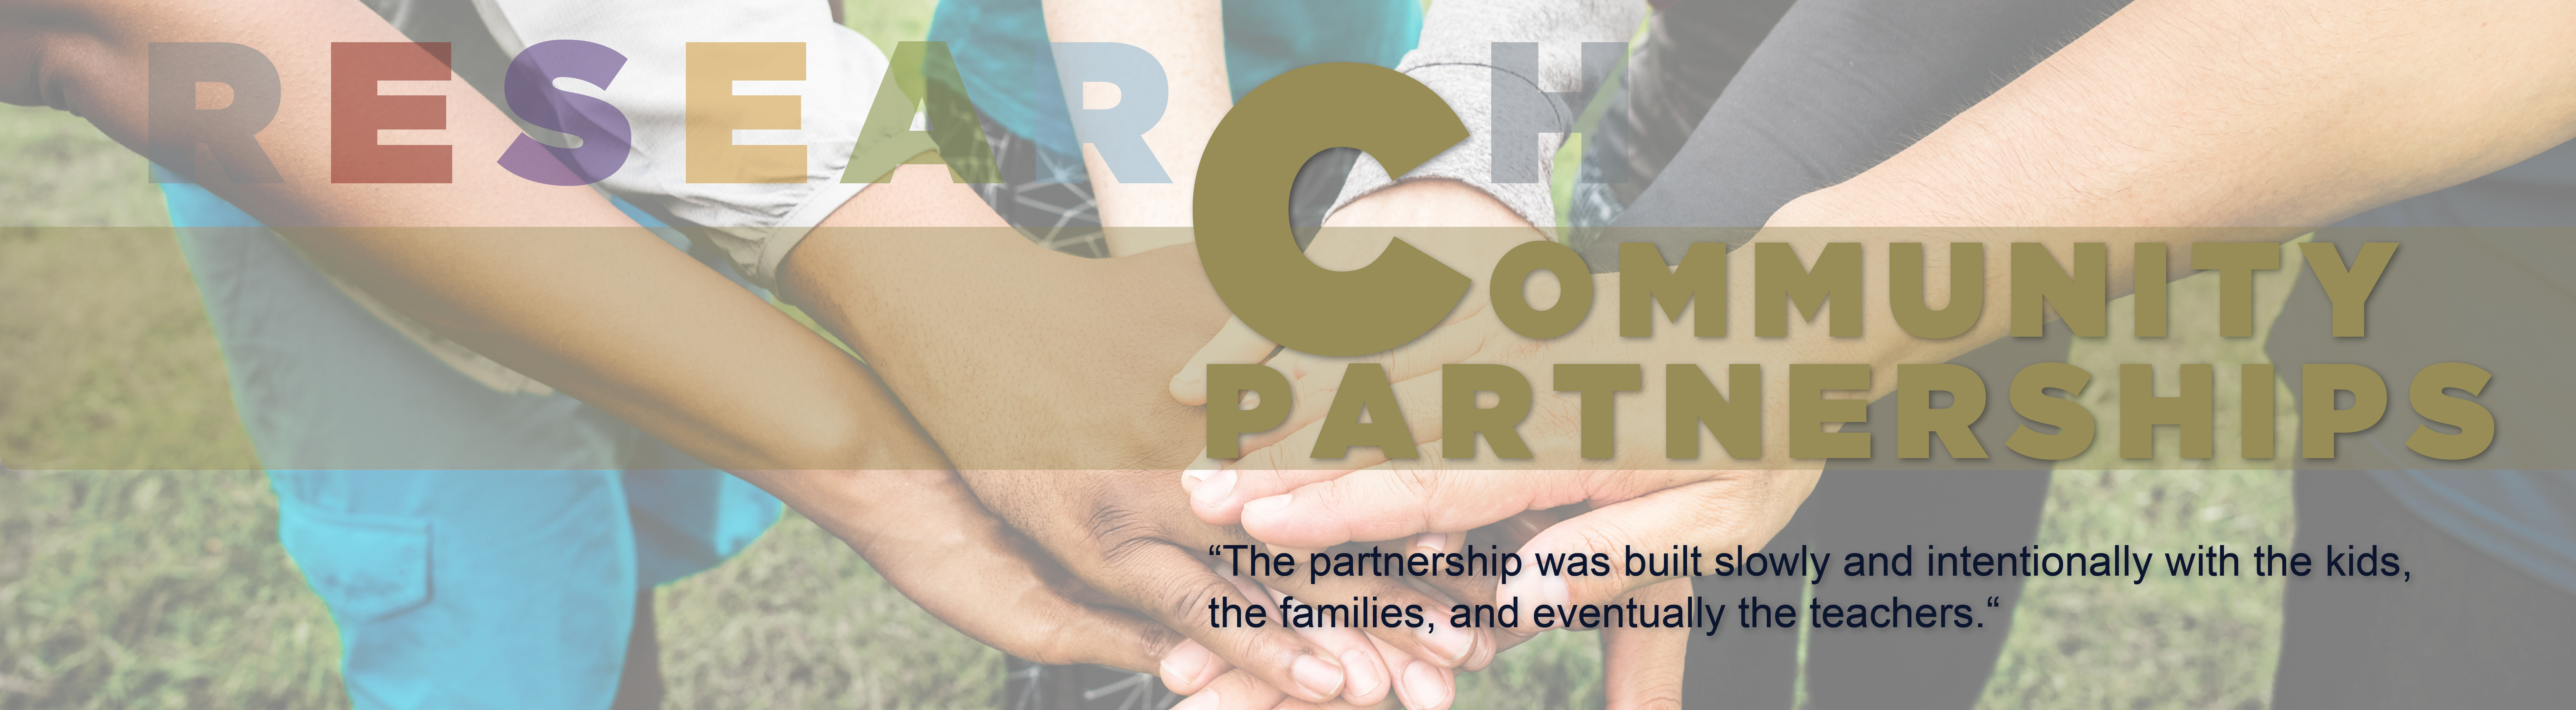 Community Partnerships: "The partnership was built slowly and intentionally with the kids, the families and eventually the teachers" - Quote by Drs. Jennie McGarry and Justin Evanovich